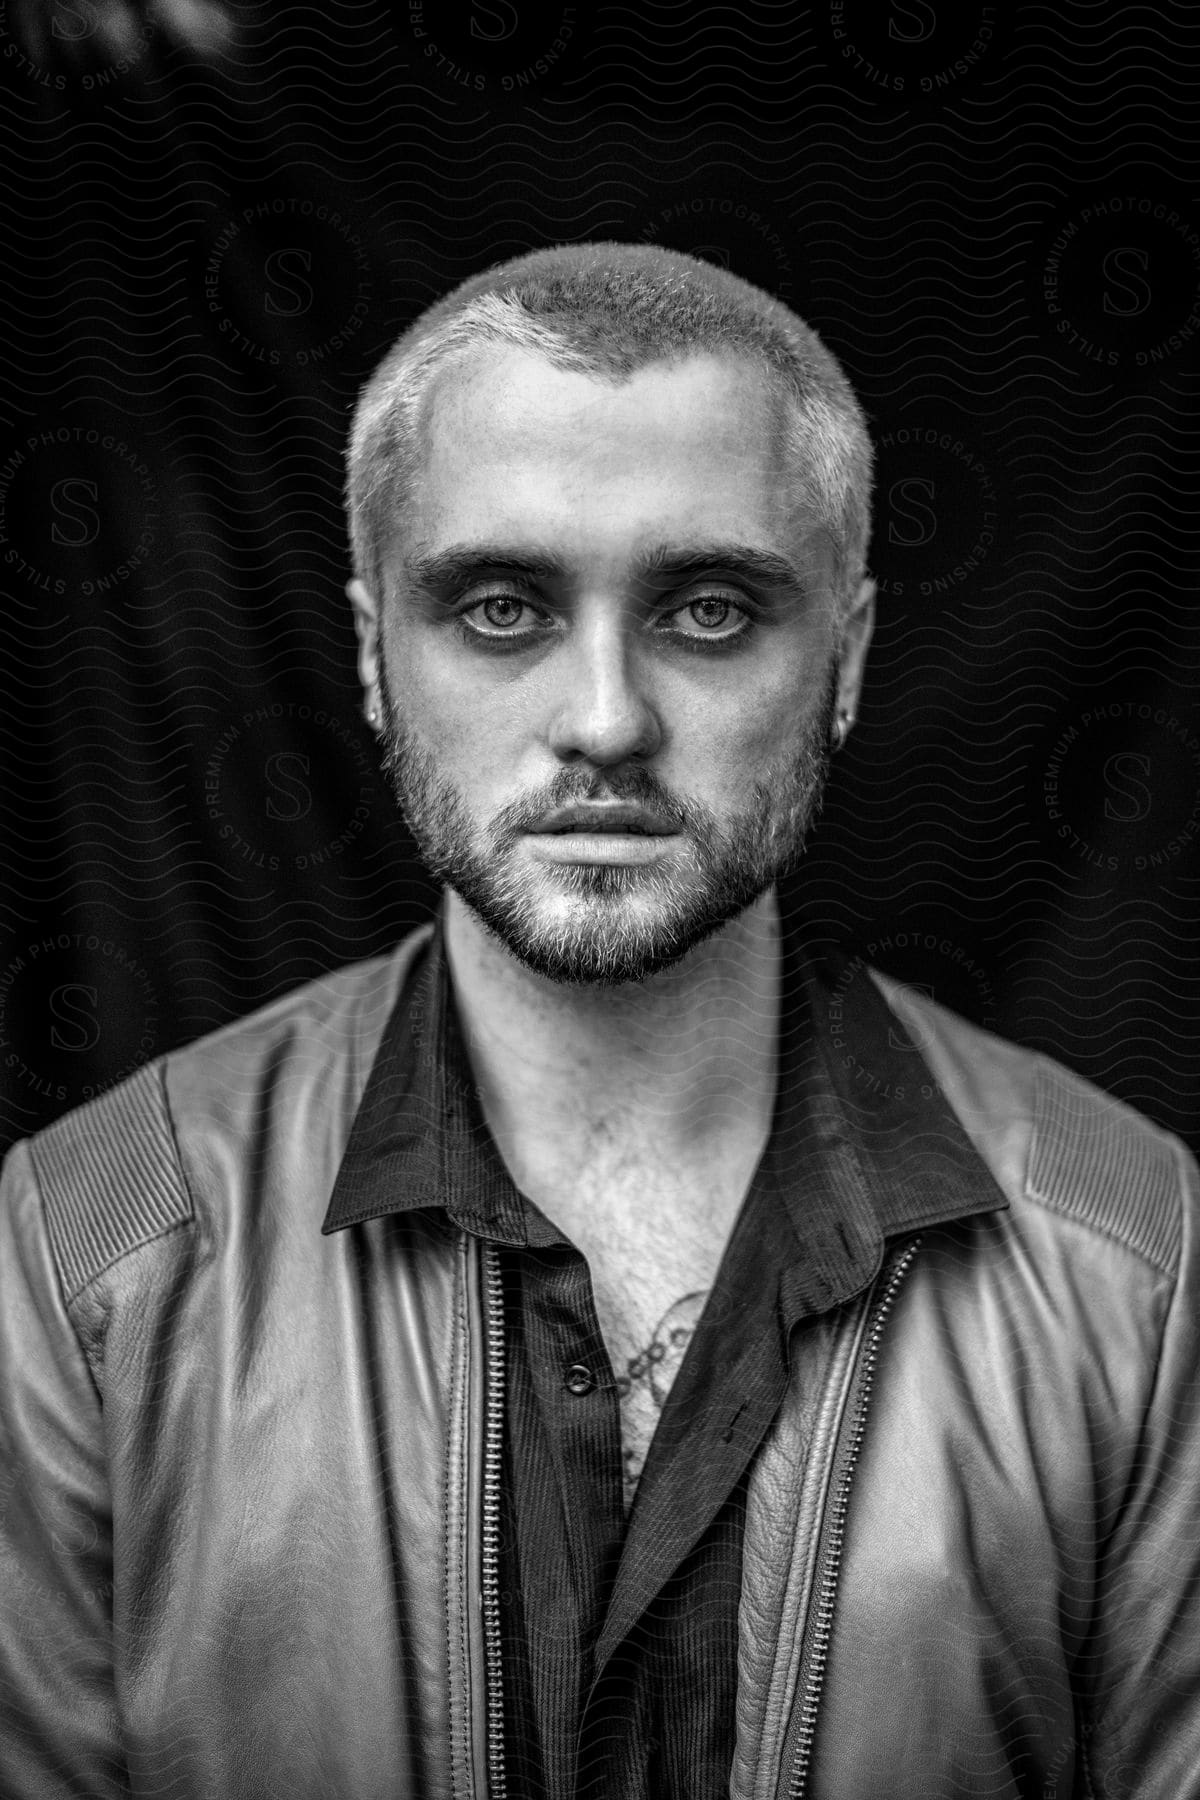 A young man with very short hair and a beard poses in a leather jacket.